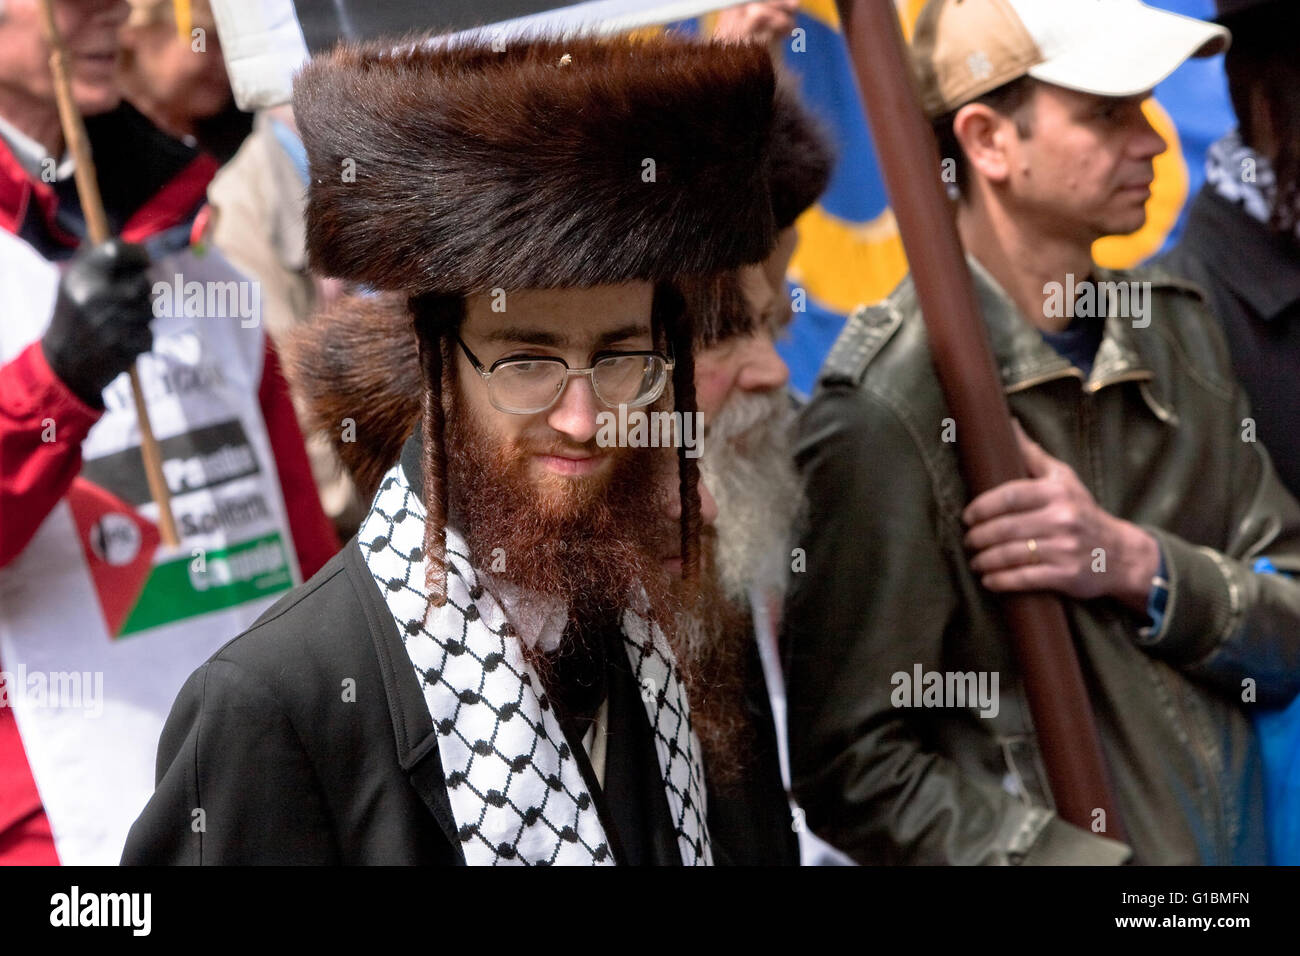 Orthodox Jews join Palestinian protesters at the Remember Gaza demonstration in London Stock Photo